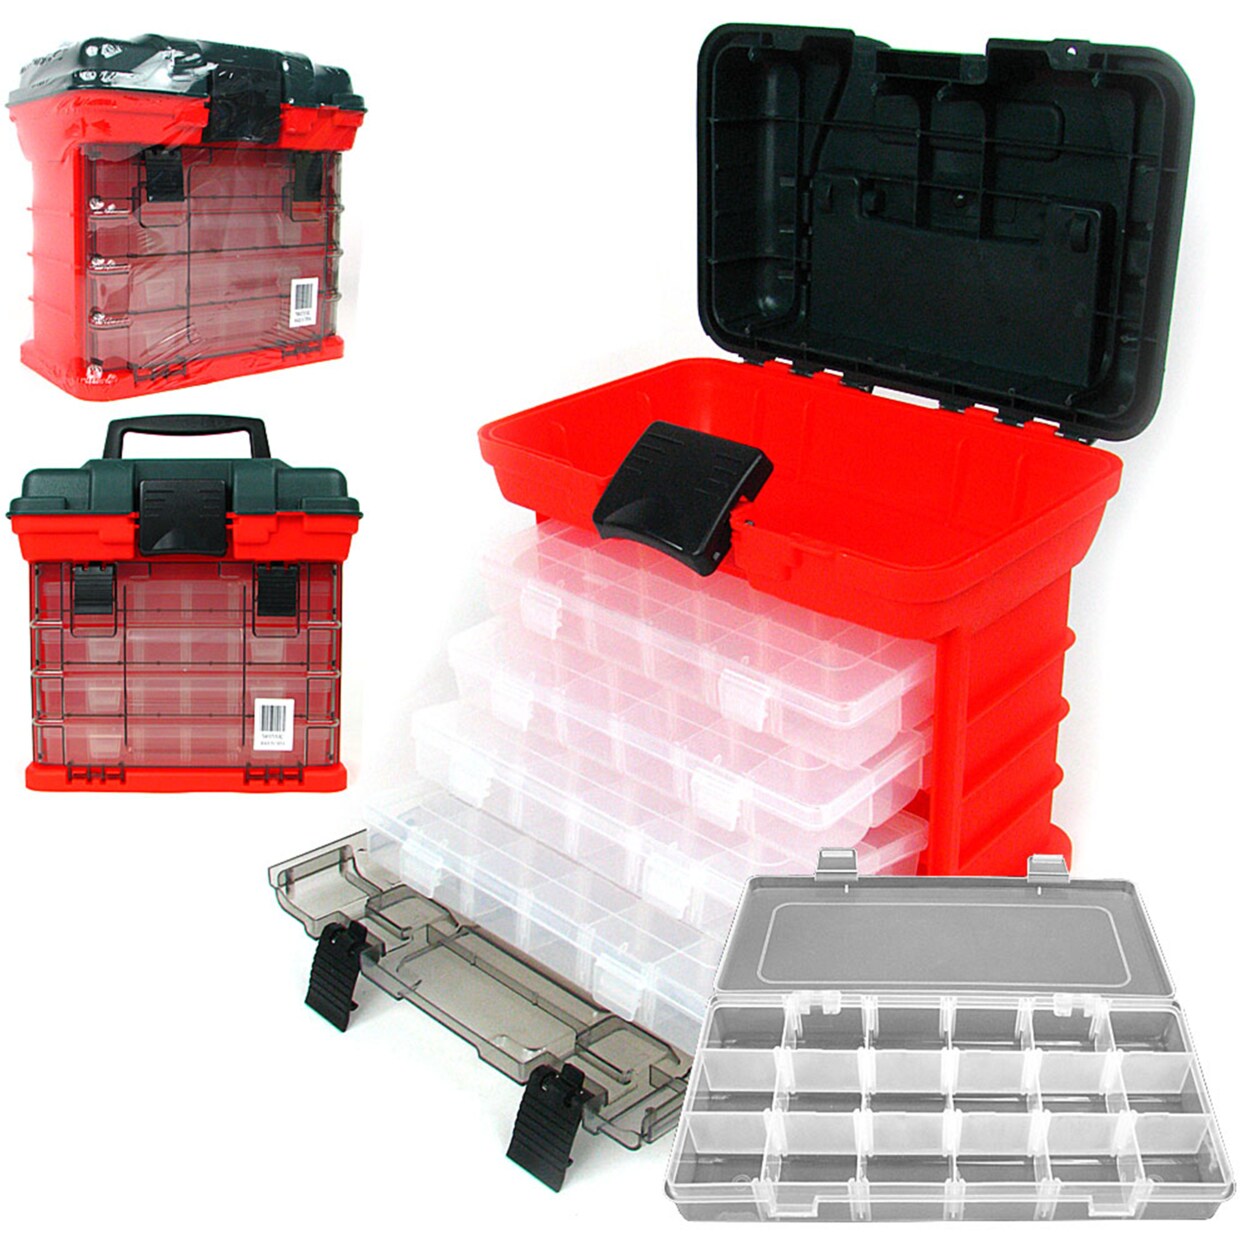 Bead Organizer Carrying Case (10x8x1-7/8in) - BC499